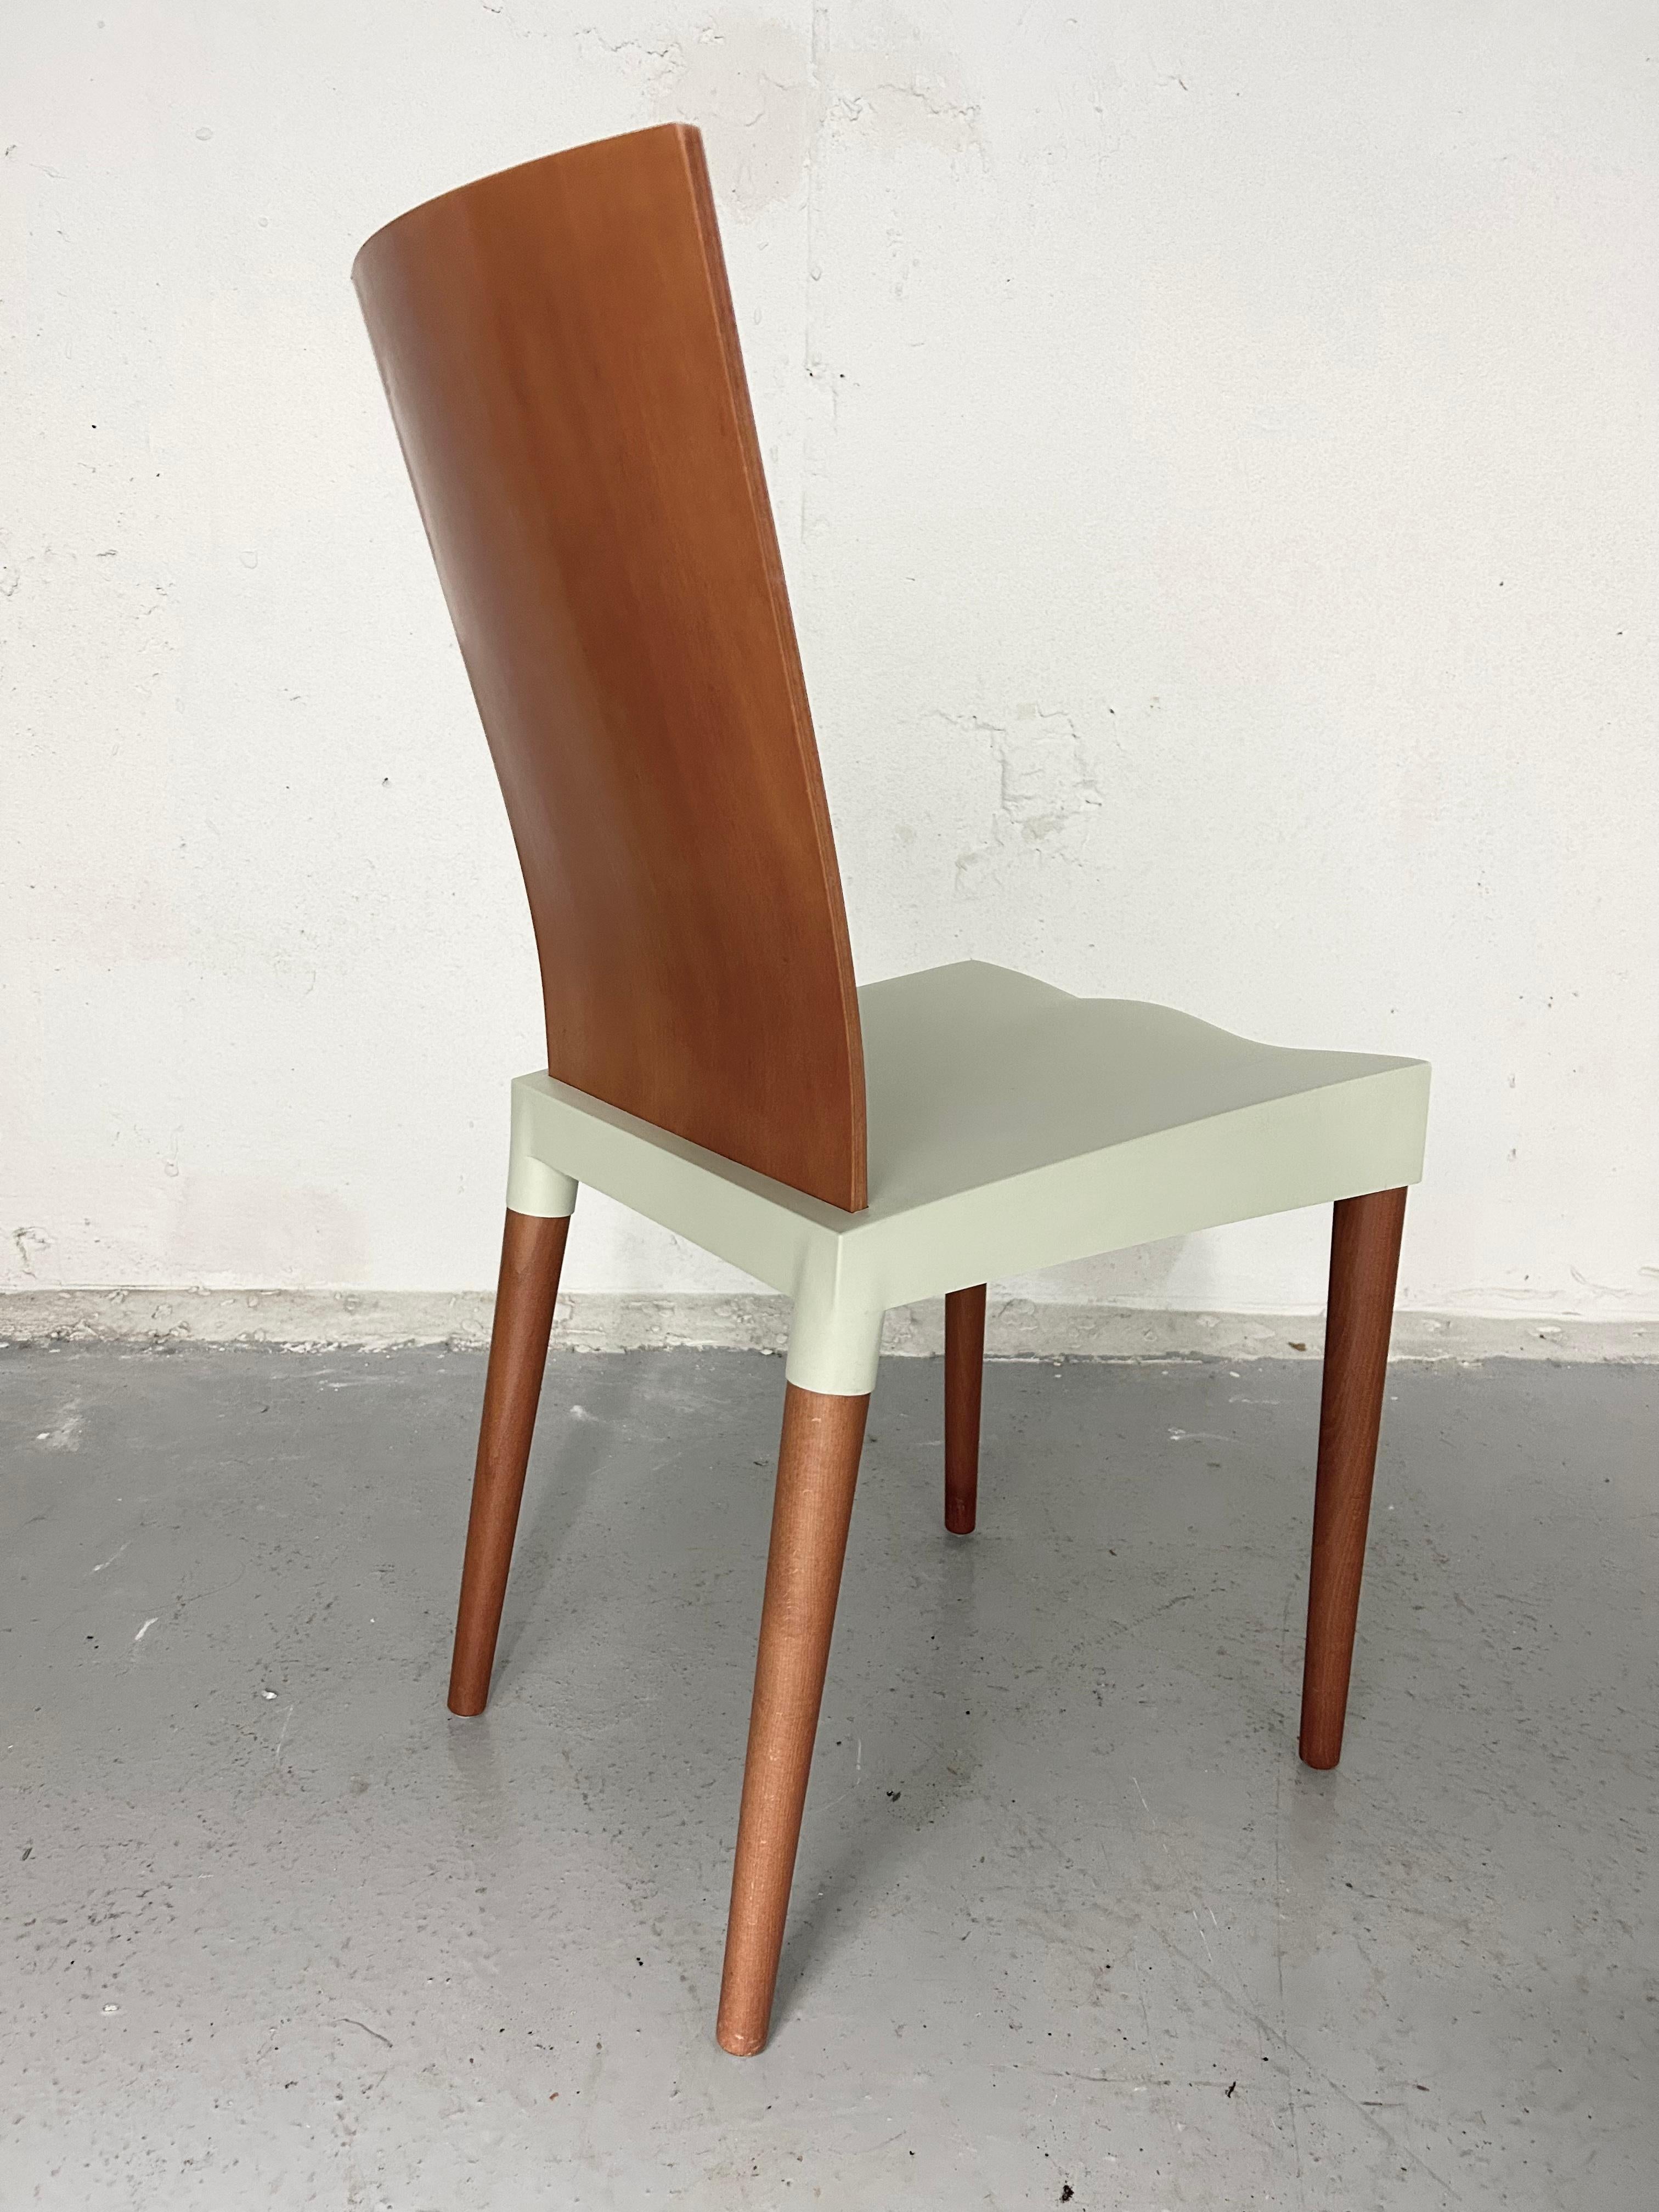 Vintage 90s miss trip chairs by Philippe Starck for Kartell - made in Italy. Minimal wear. One chair does have tiny chip in top left corner of the wood. 

Measures: 34” height.
18” seat height.
15.5” width.
16” dept.h